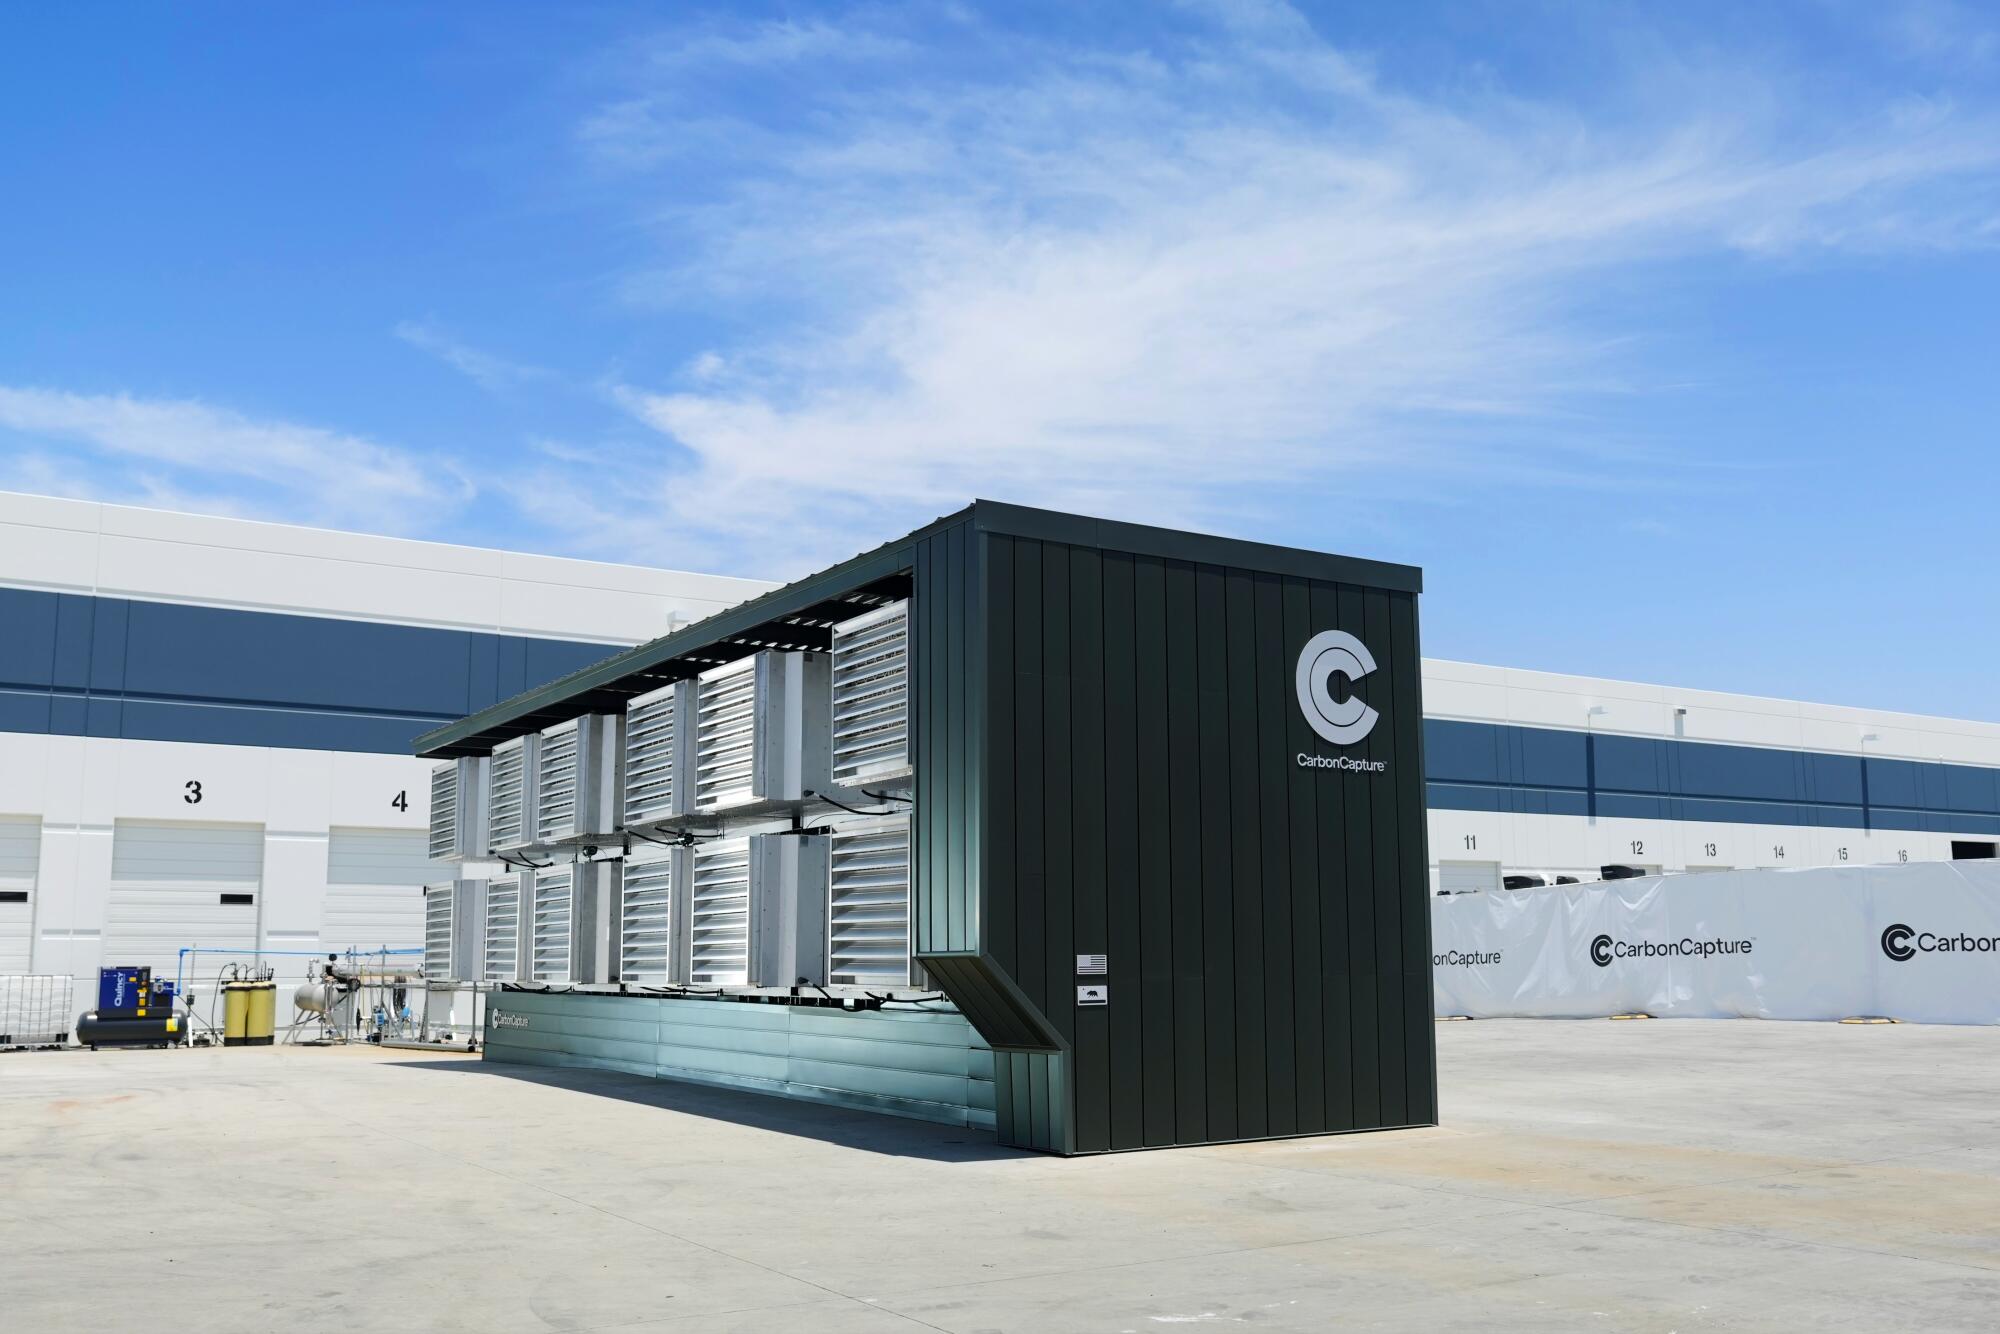 A a large rectangular metal box that sits outside under a blue sky.